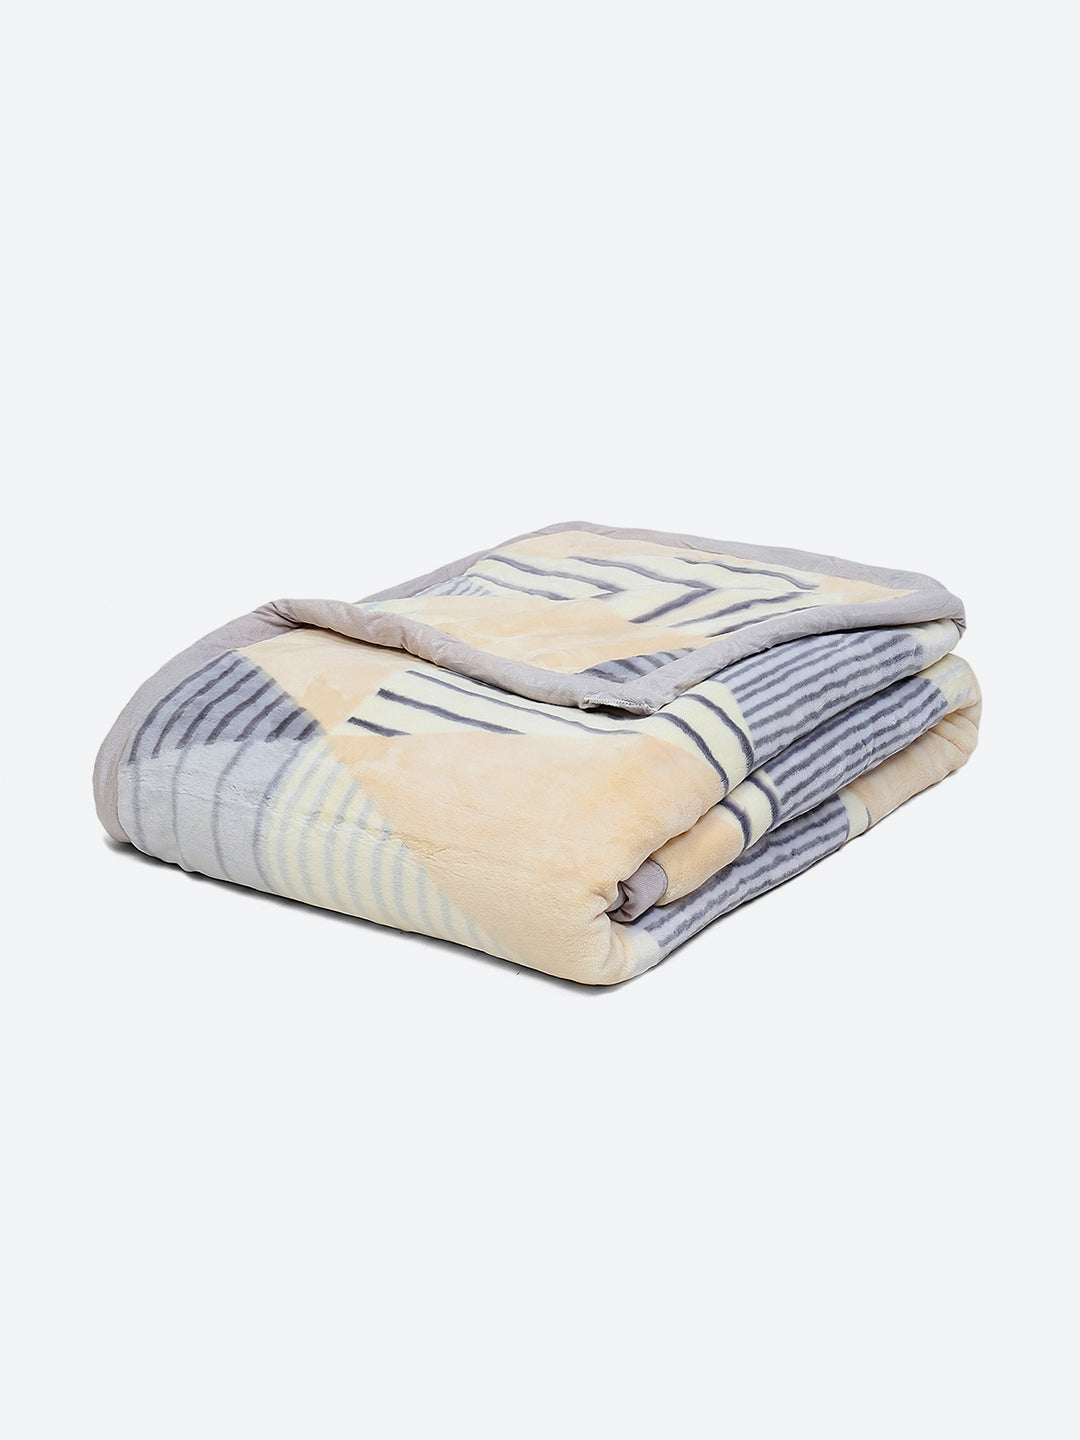 Printed Double Bed Blanket for Heavy Winter -2 Ply